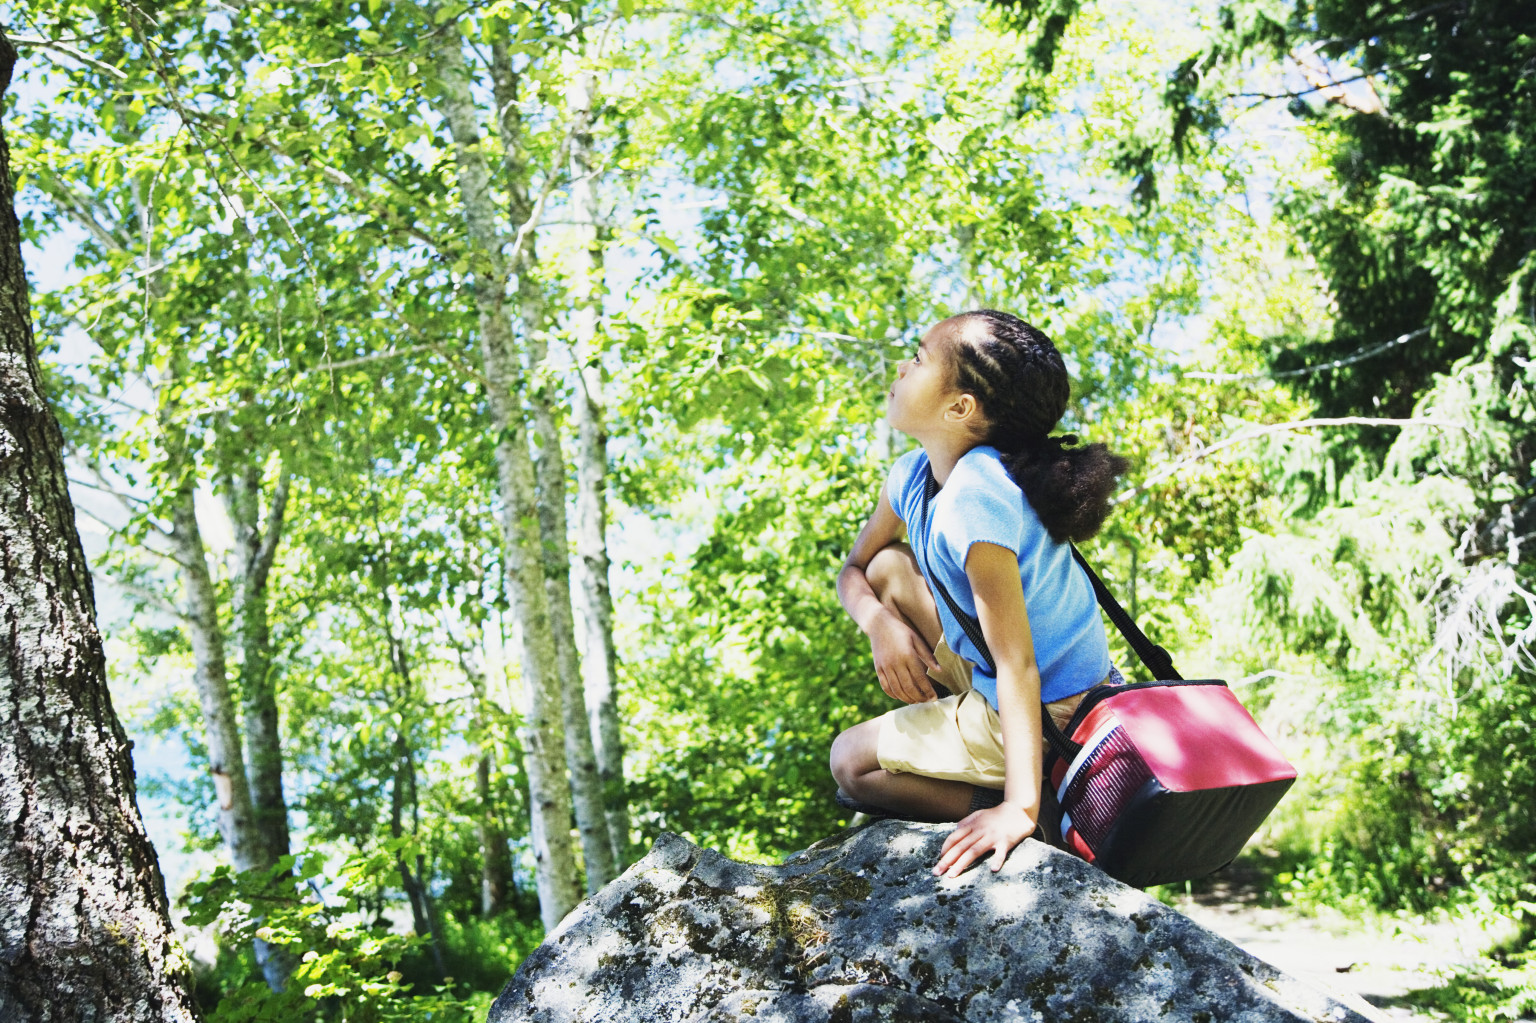 41 Outdoor Activities To Get Kids Out Of The House This Summer | HuffPost